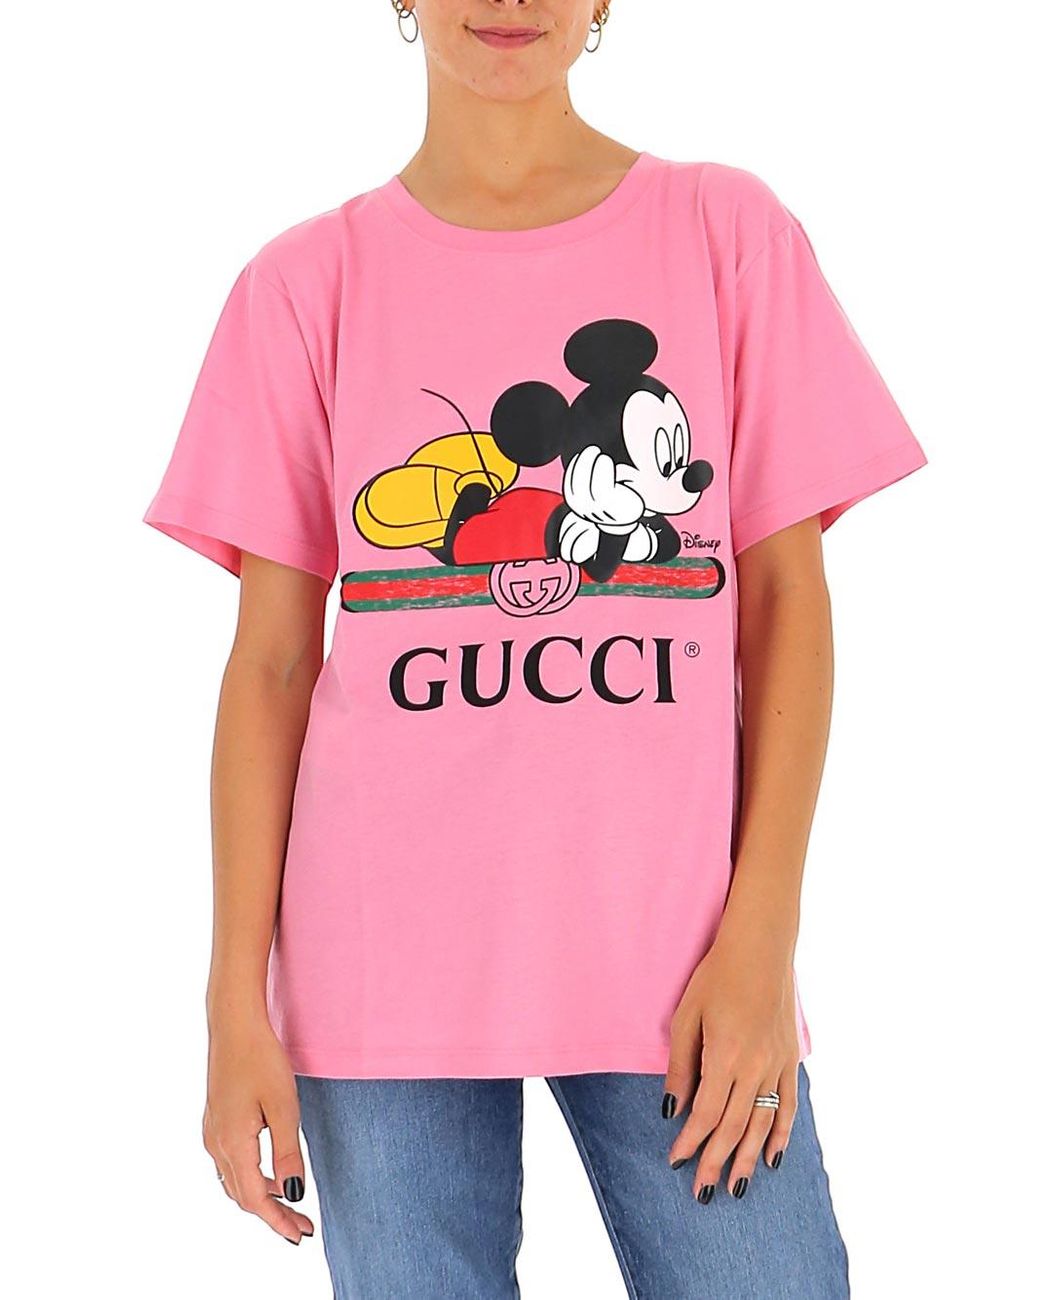 Gucci X Disney Donald Duck Cropped T-shirt in Pink